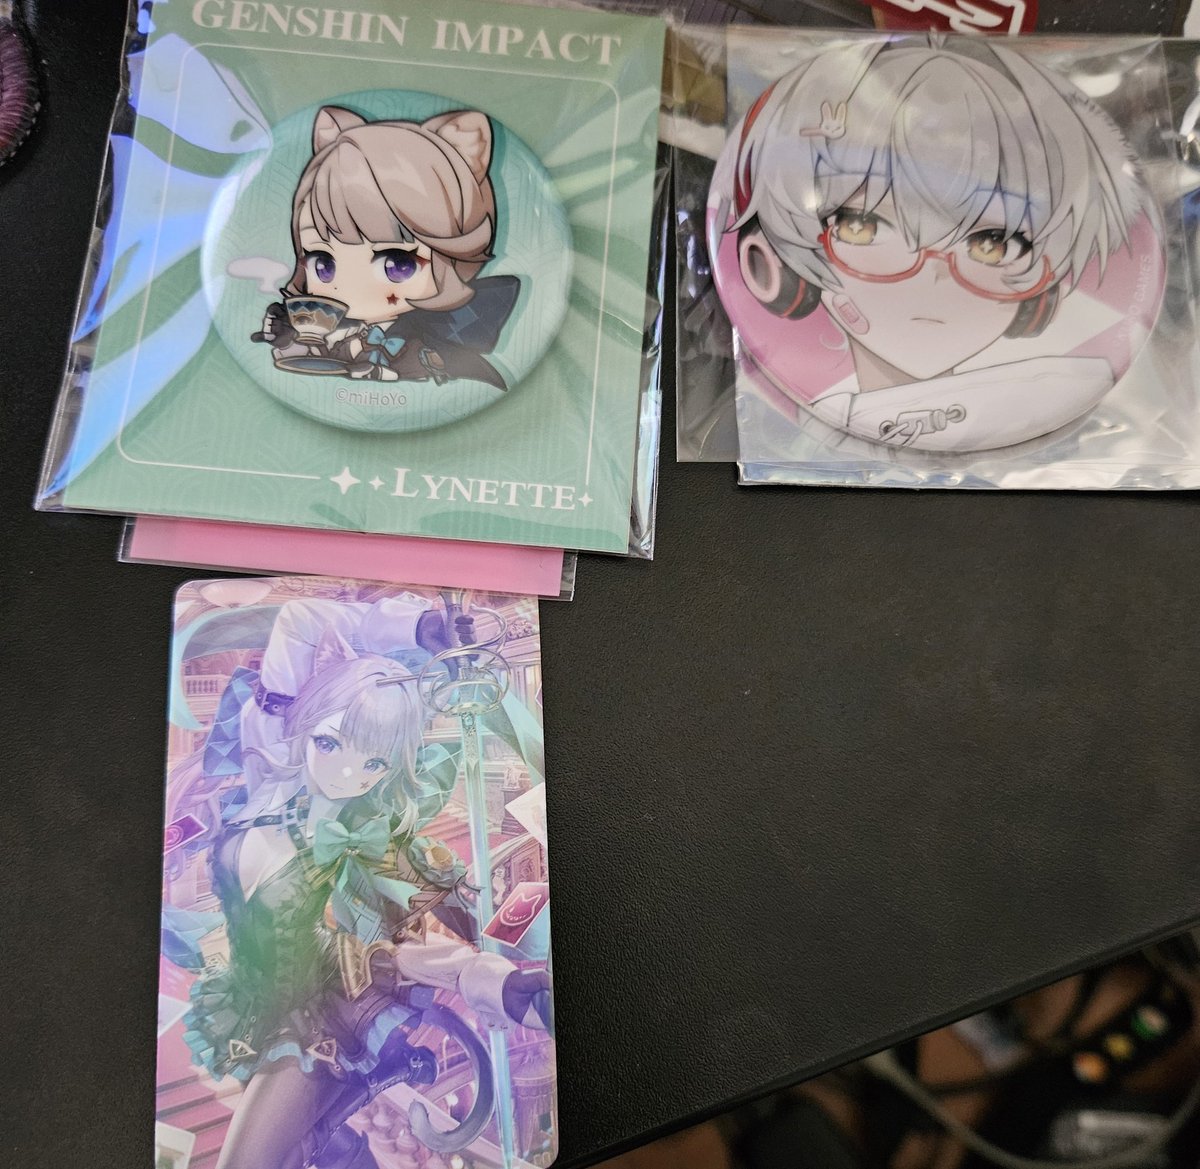 Got more badges for the collection. One of the vendors gave me that Lynette card for free which was hype. The other thing is a Luna badge from this limited Pgr collab I tried to find merch of and that's all I could snag.